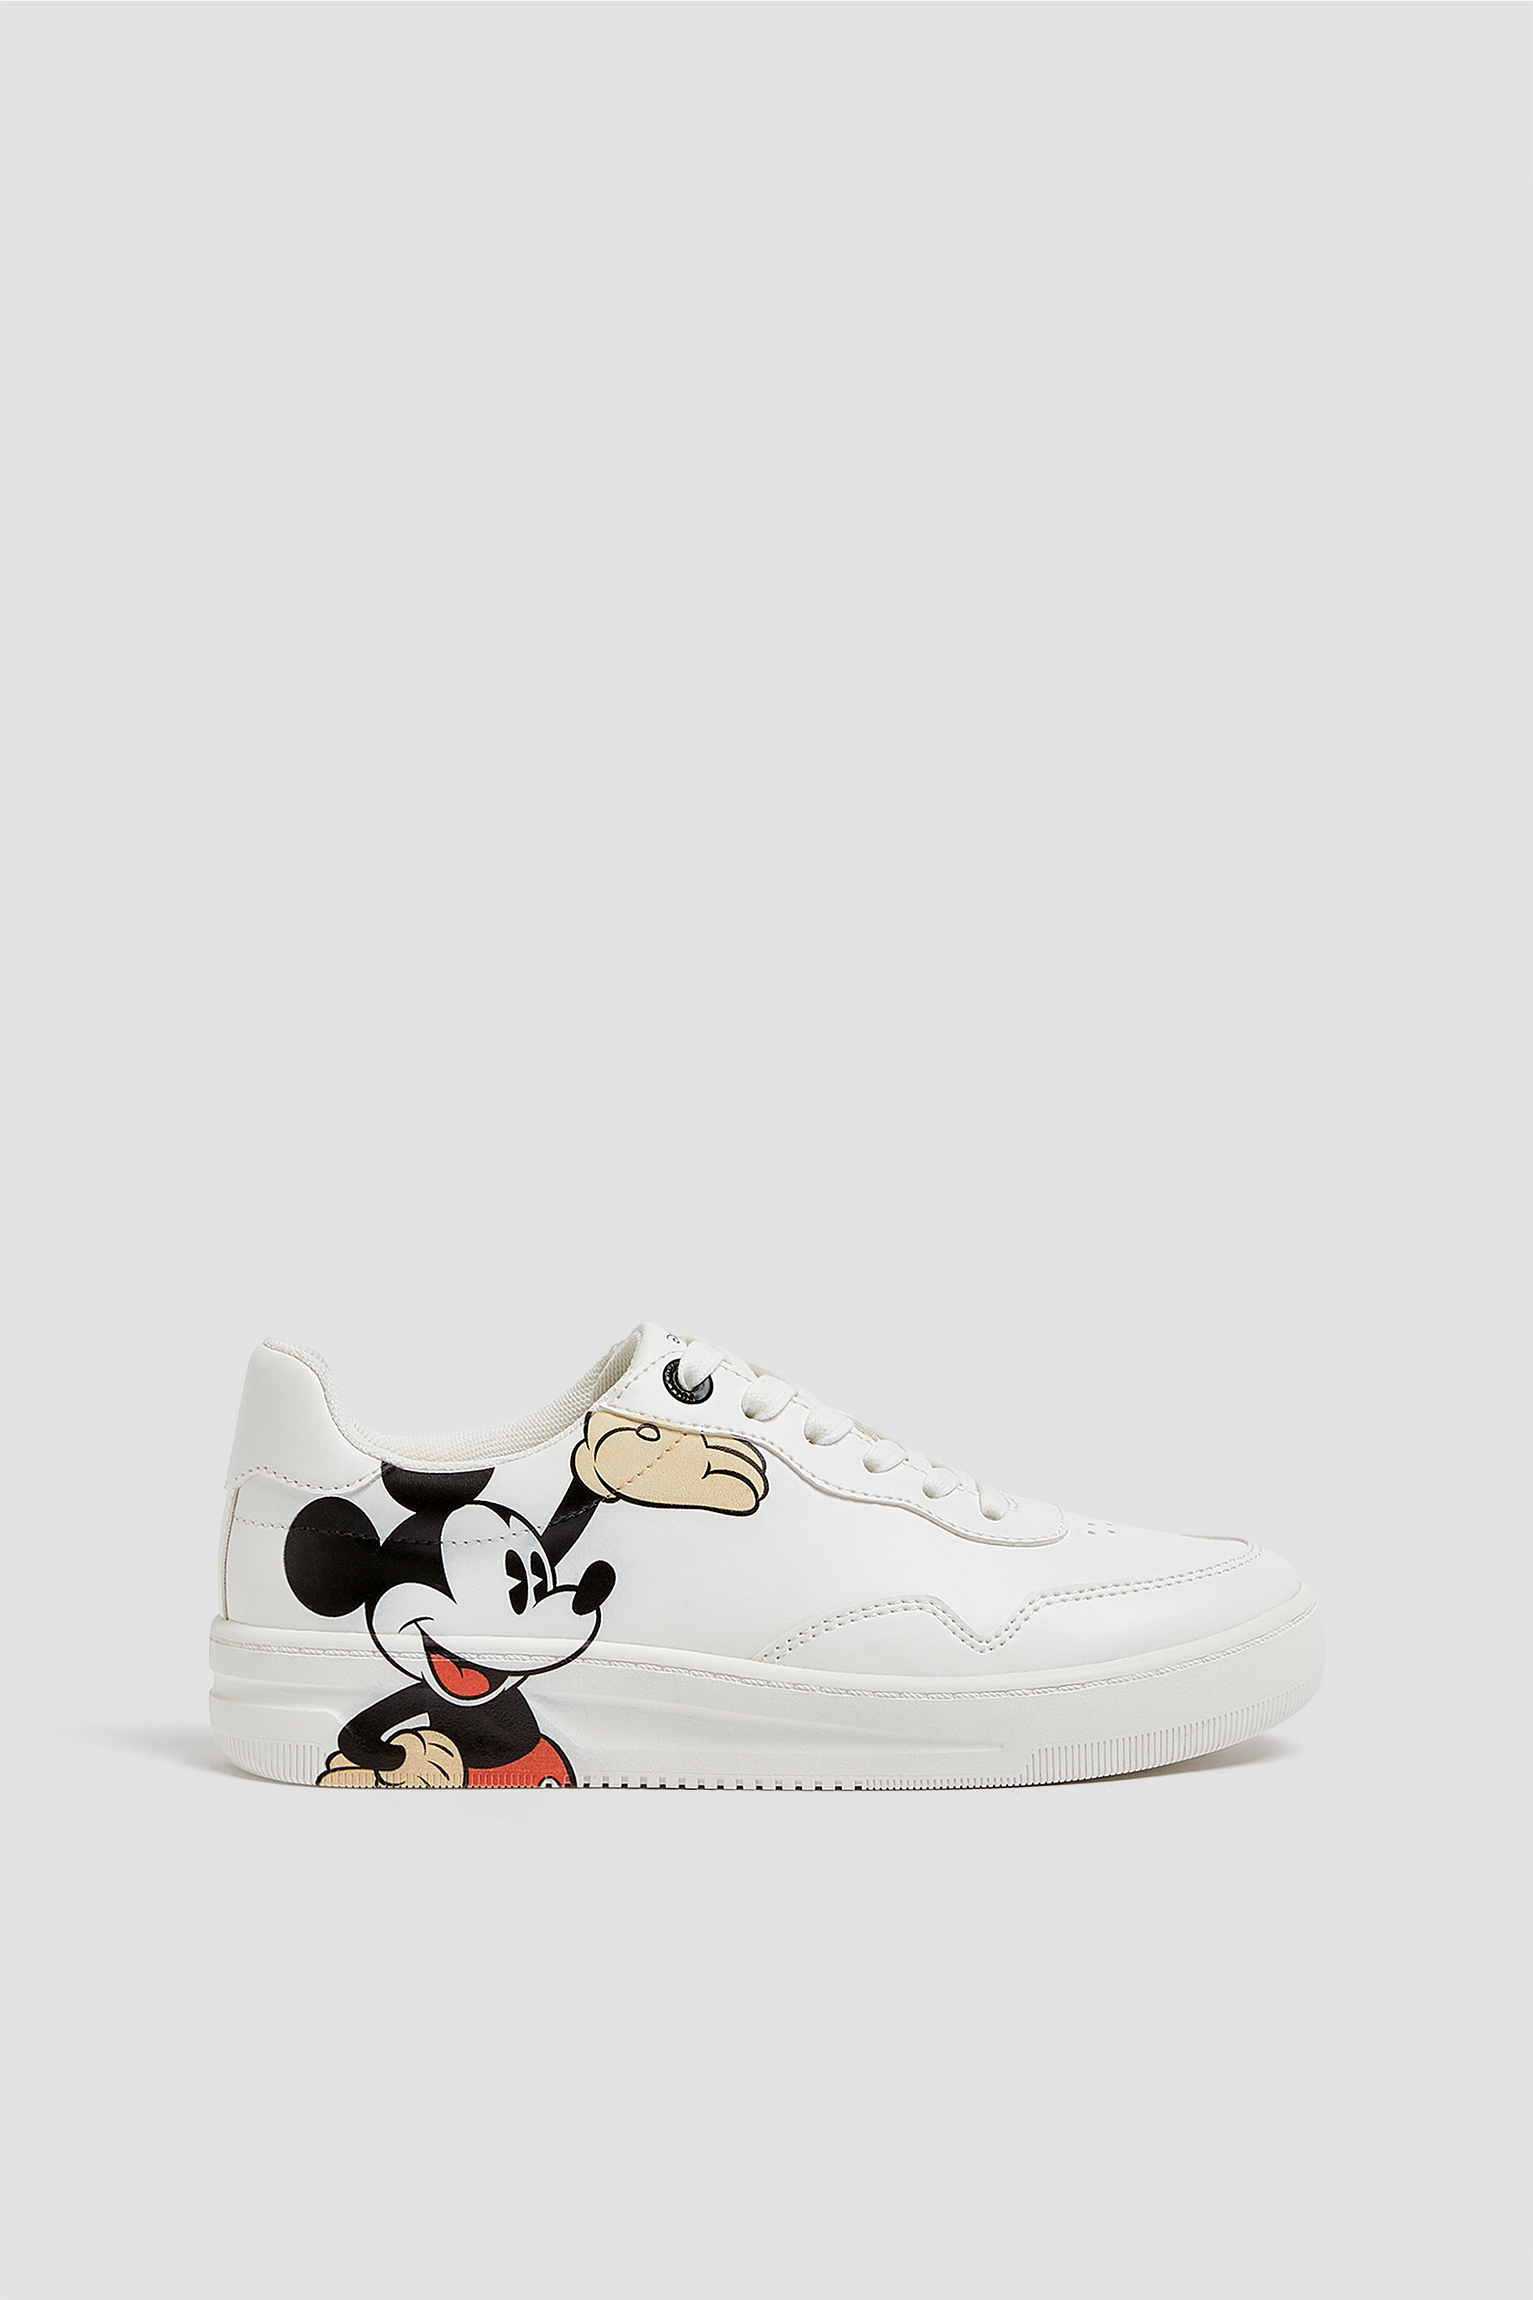 Mickey Mouse sneakers - pull\u0026bear